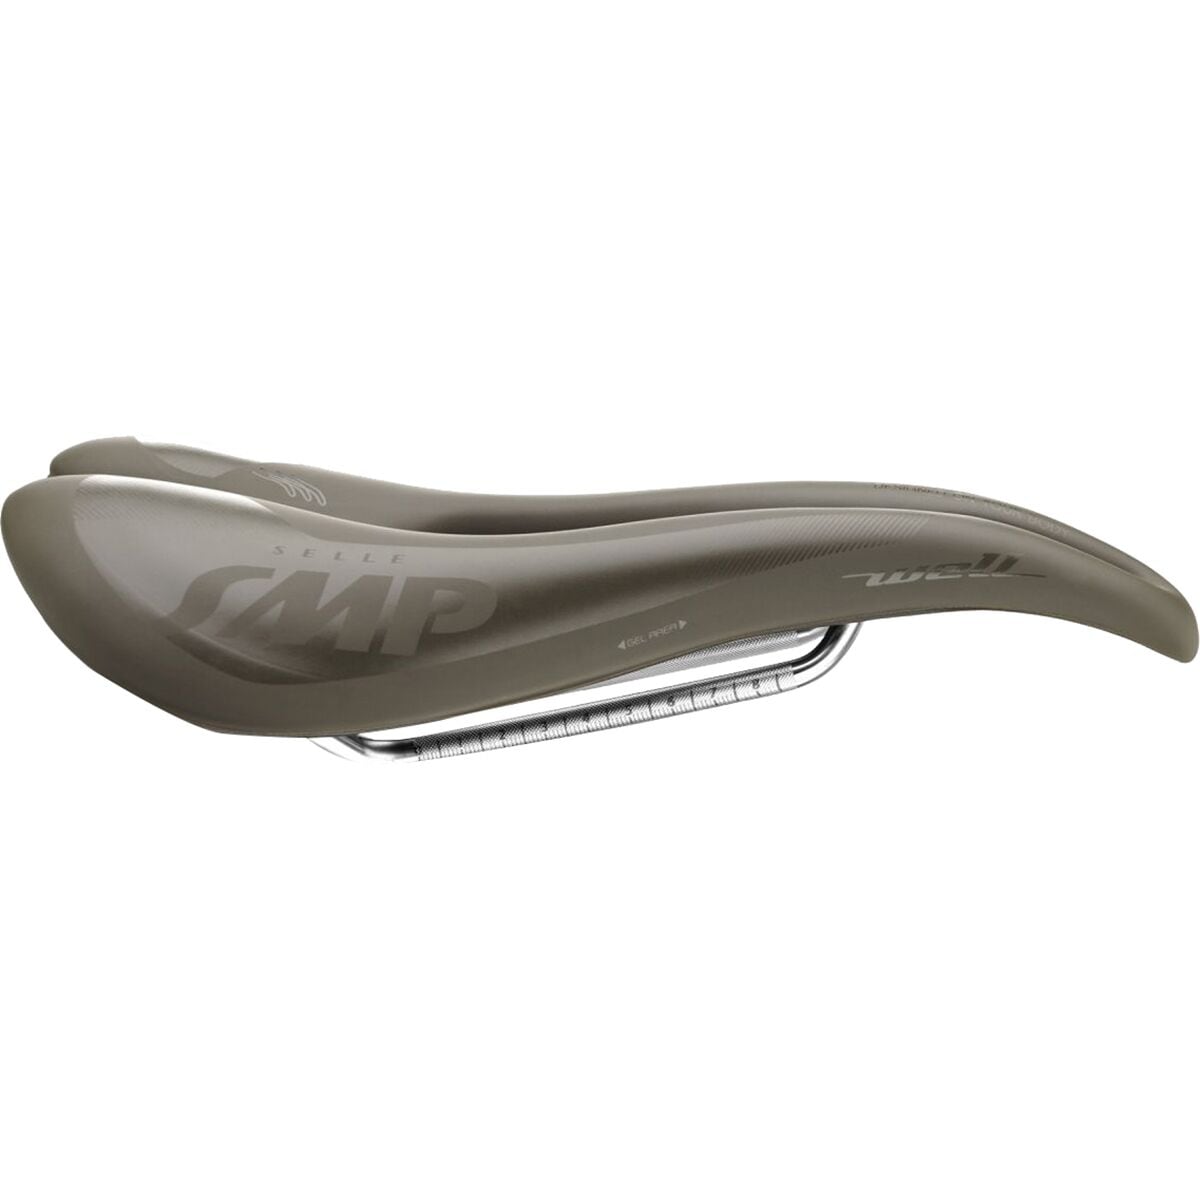 Selle SMP Well-Gel with Carbon Rail Saddle Grey-Brown Gravel, 144mm